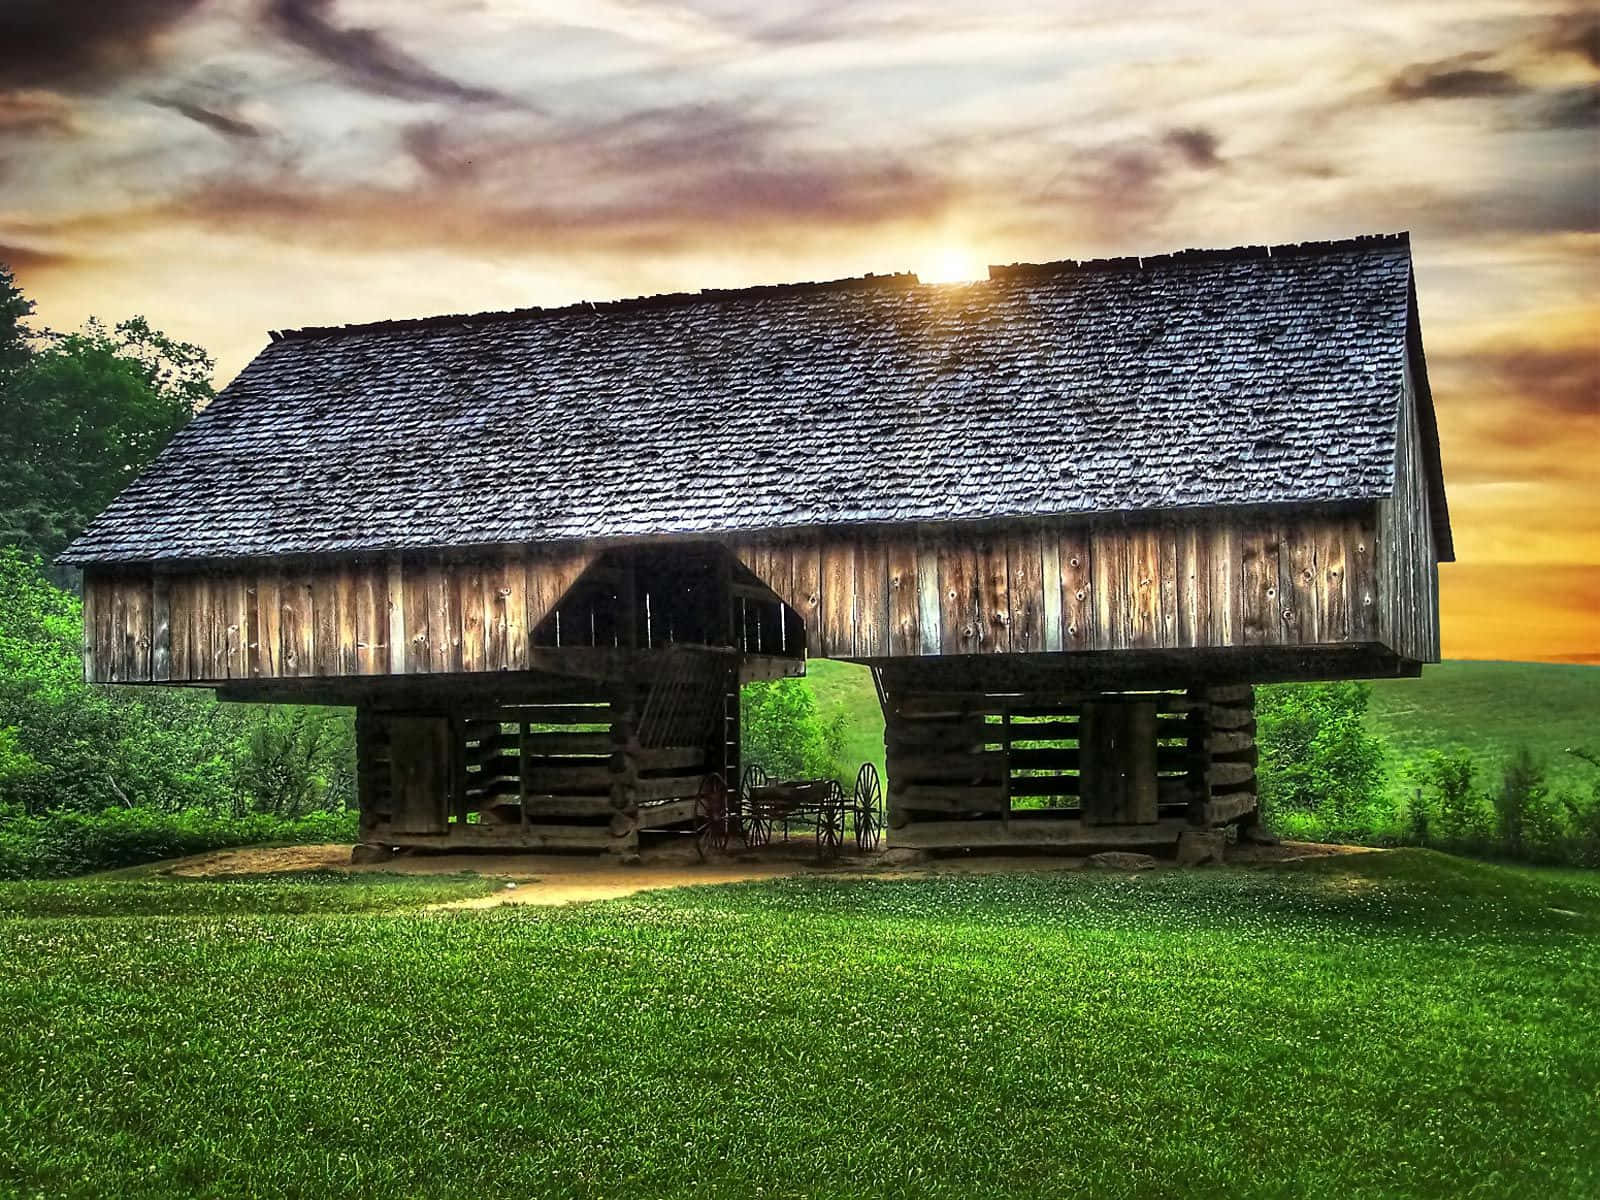 A Wooden Barn Sitting In The Middle Of A Field